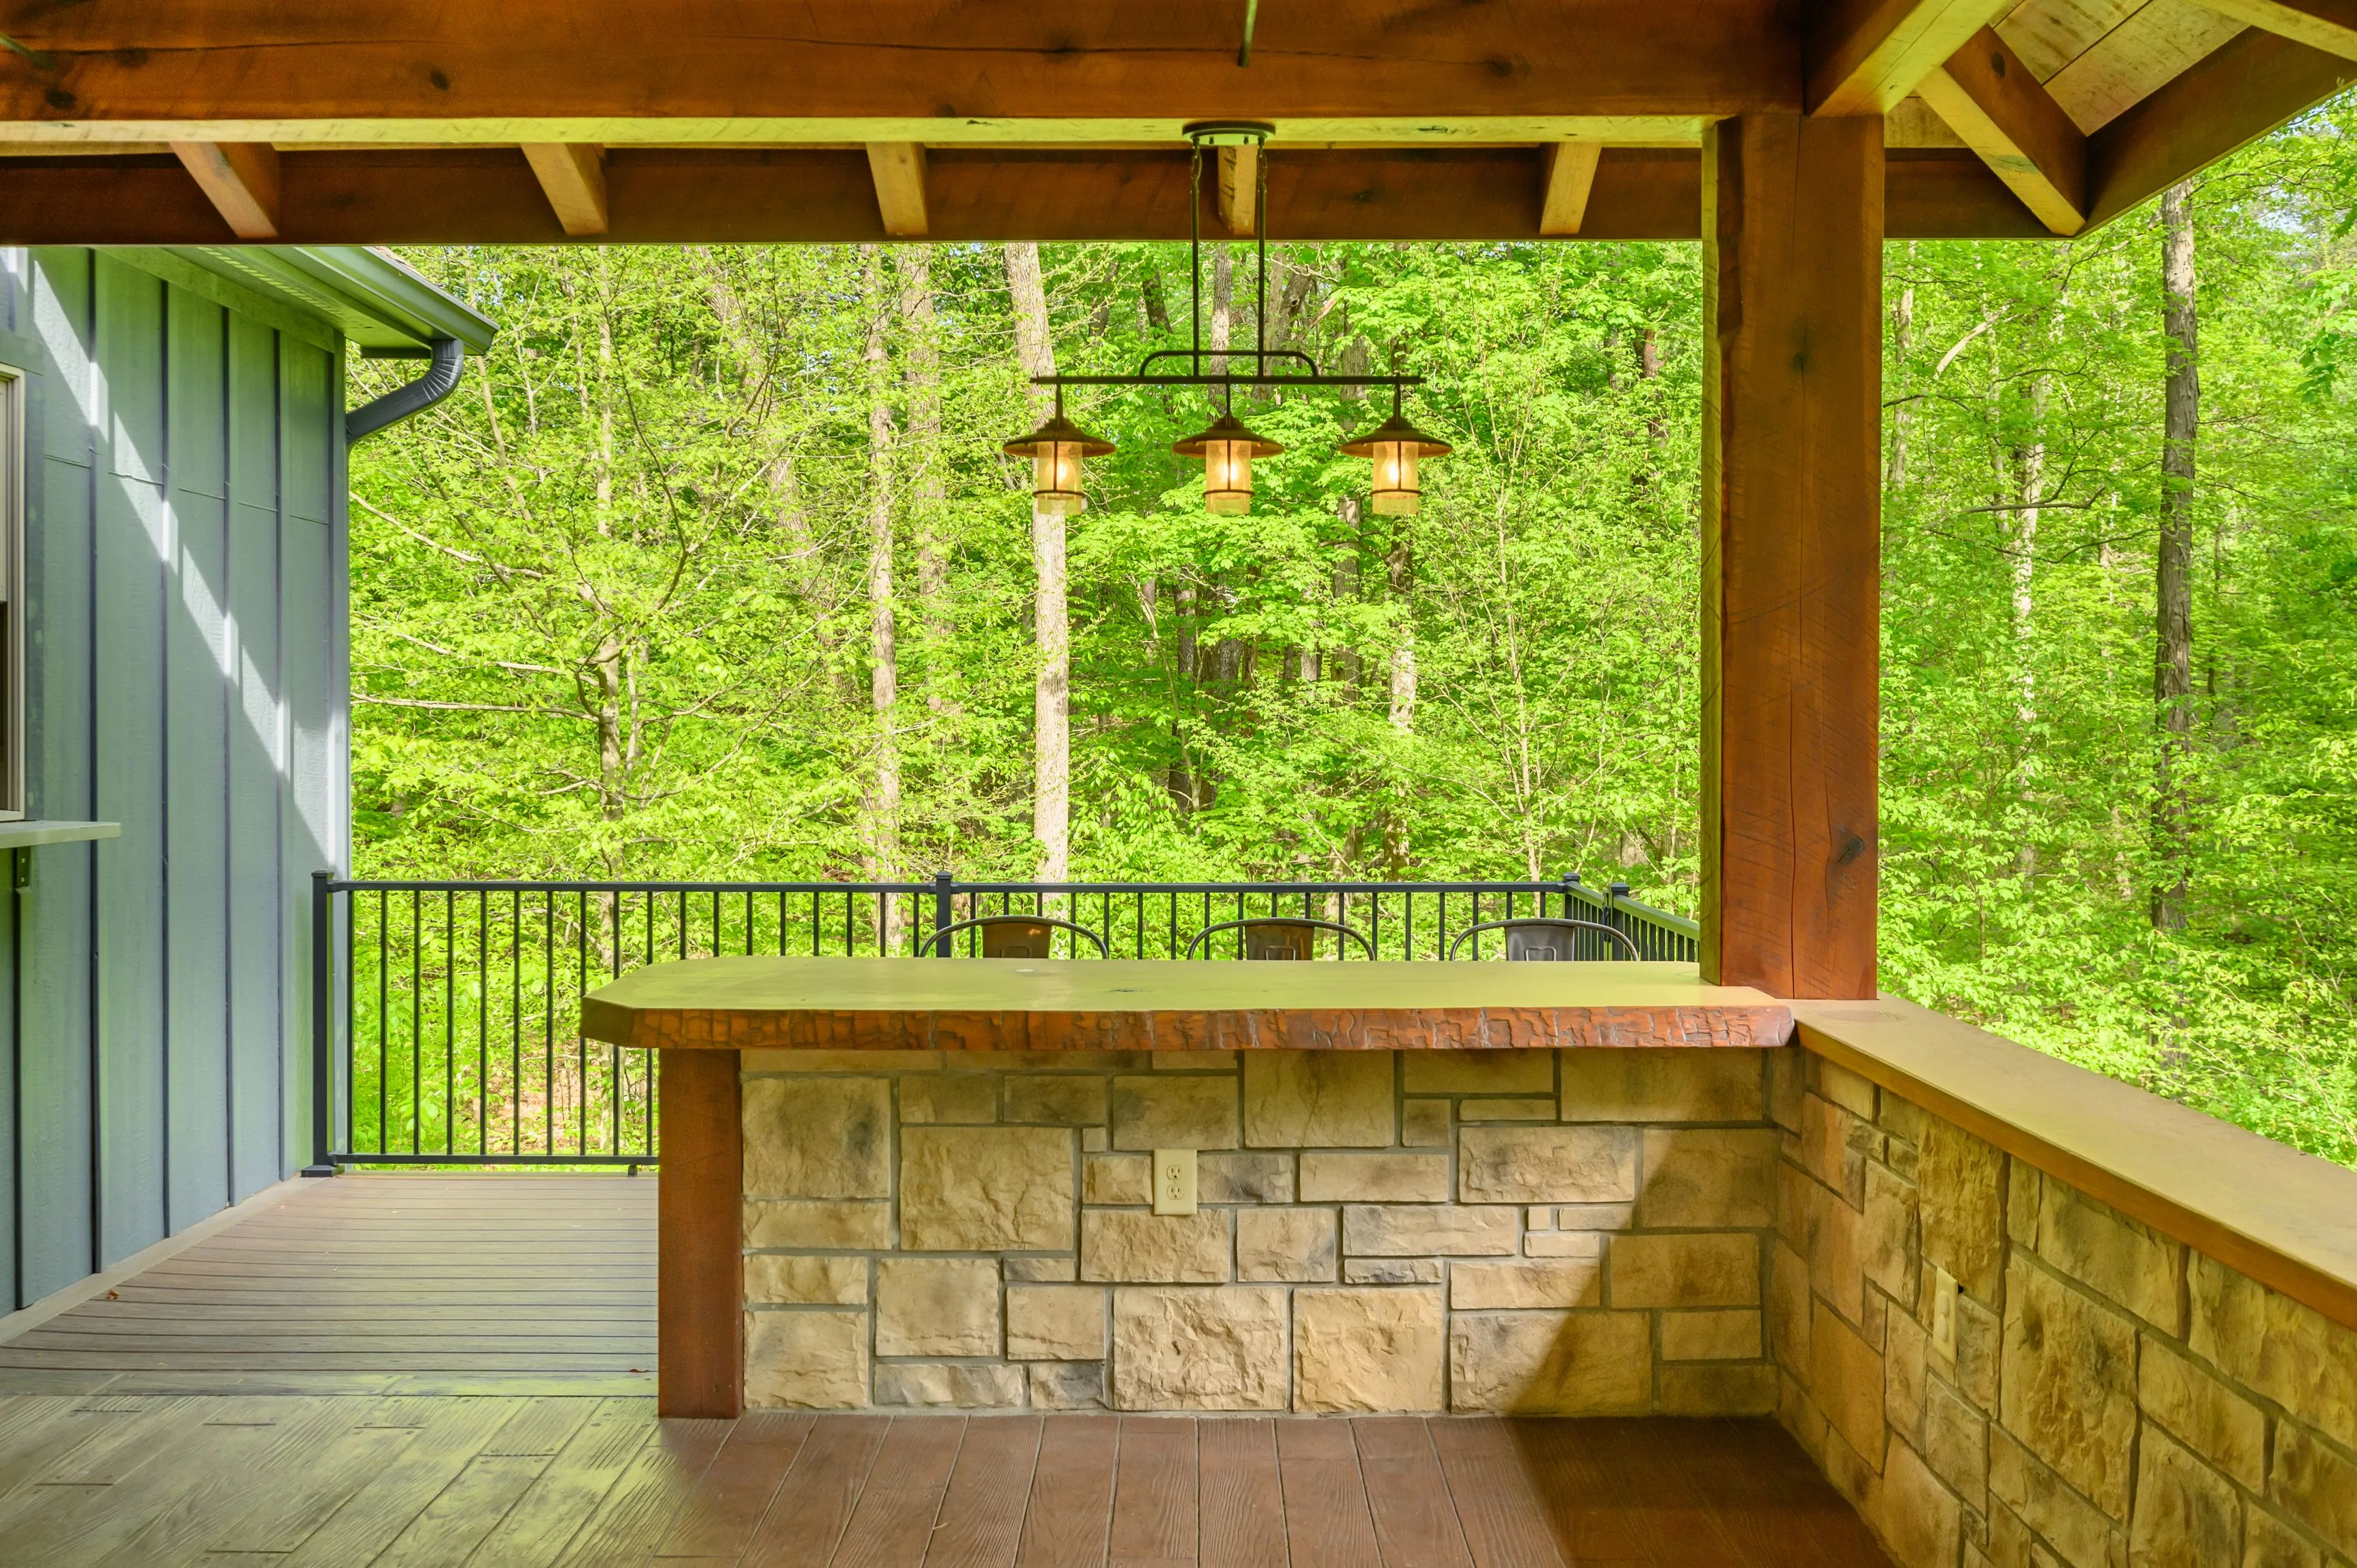 Covered wooden deck with a stone bar counter, iron railing, and forest view.